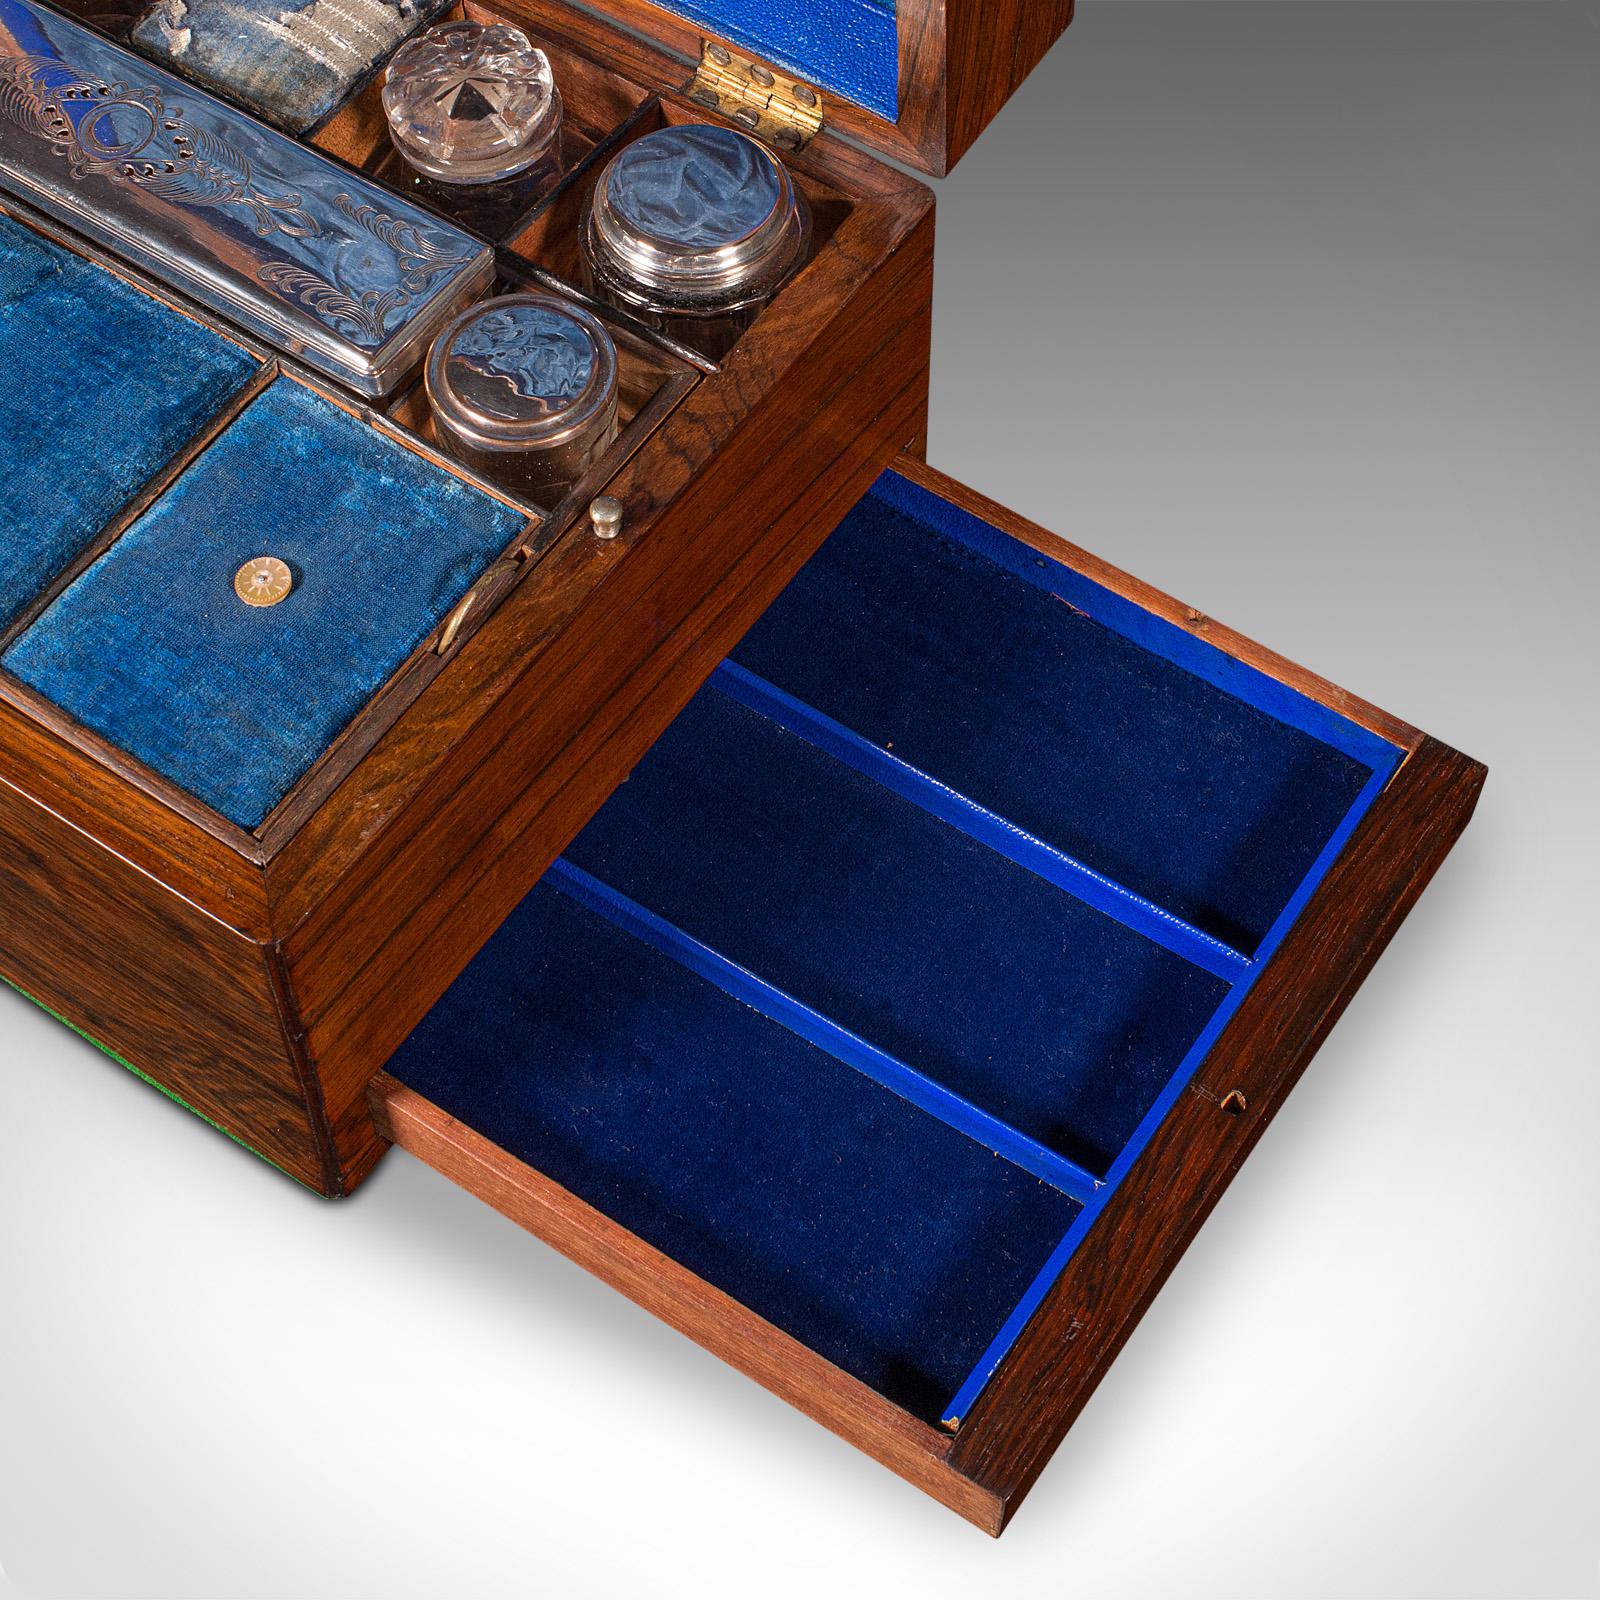 Antique Vanity Case, English, Travelling Dressing Table Box, Regency, Circa 1820 For Sale 3